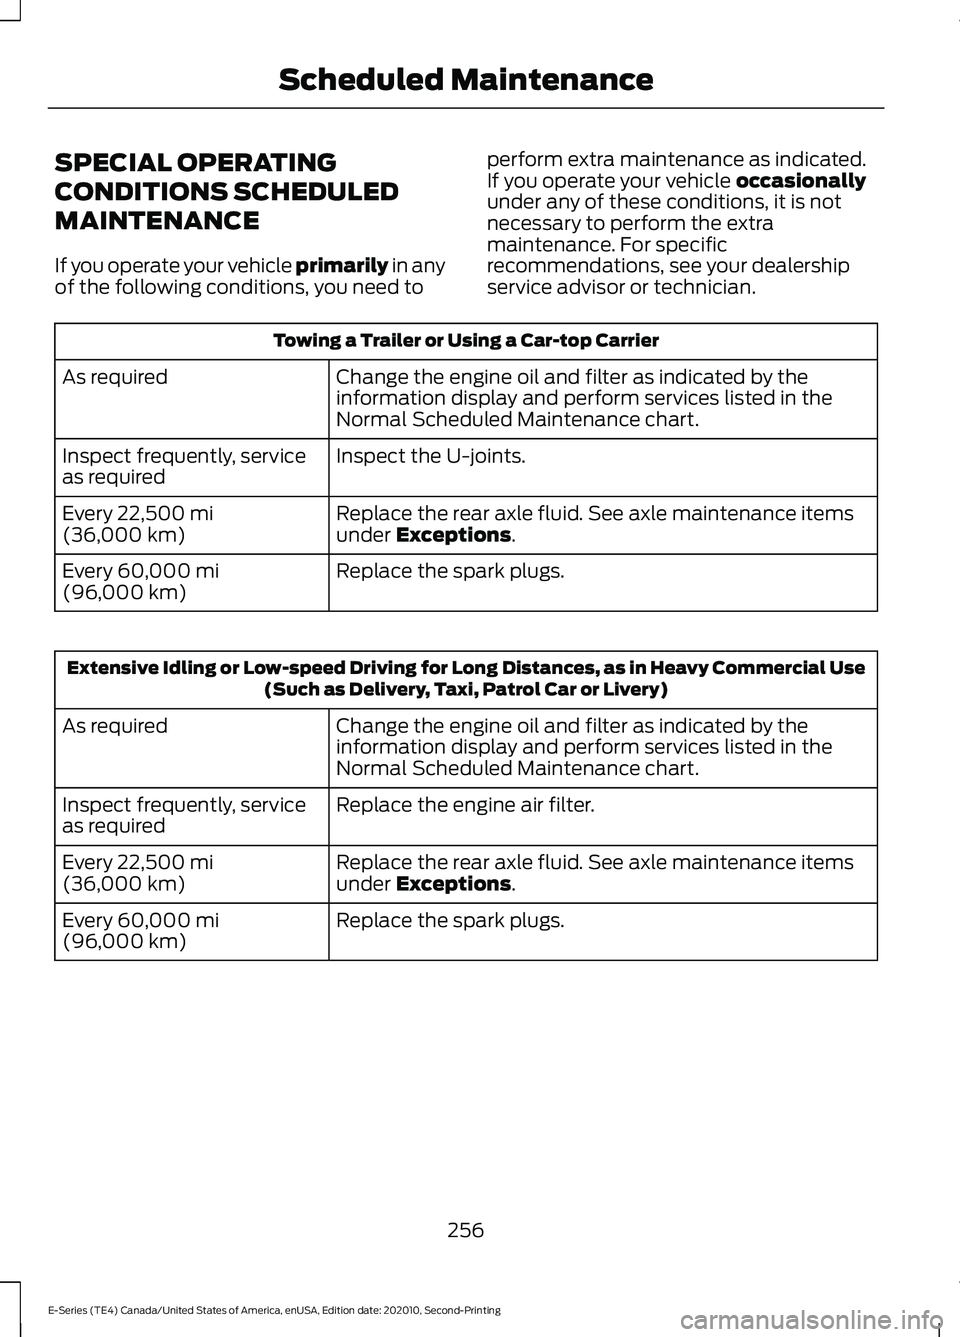 FORD E-350 2022  Owners Manual SPECIAL OPERATING
CONDITIONS SCHEDULED
MAINTENANCE
If you operate your vehicle primarily in any
of the following conditions, you need to perform extra maintenance as indicated.
If you operate your veh